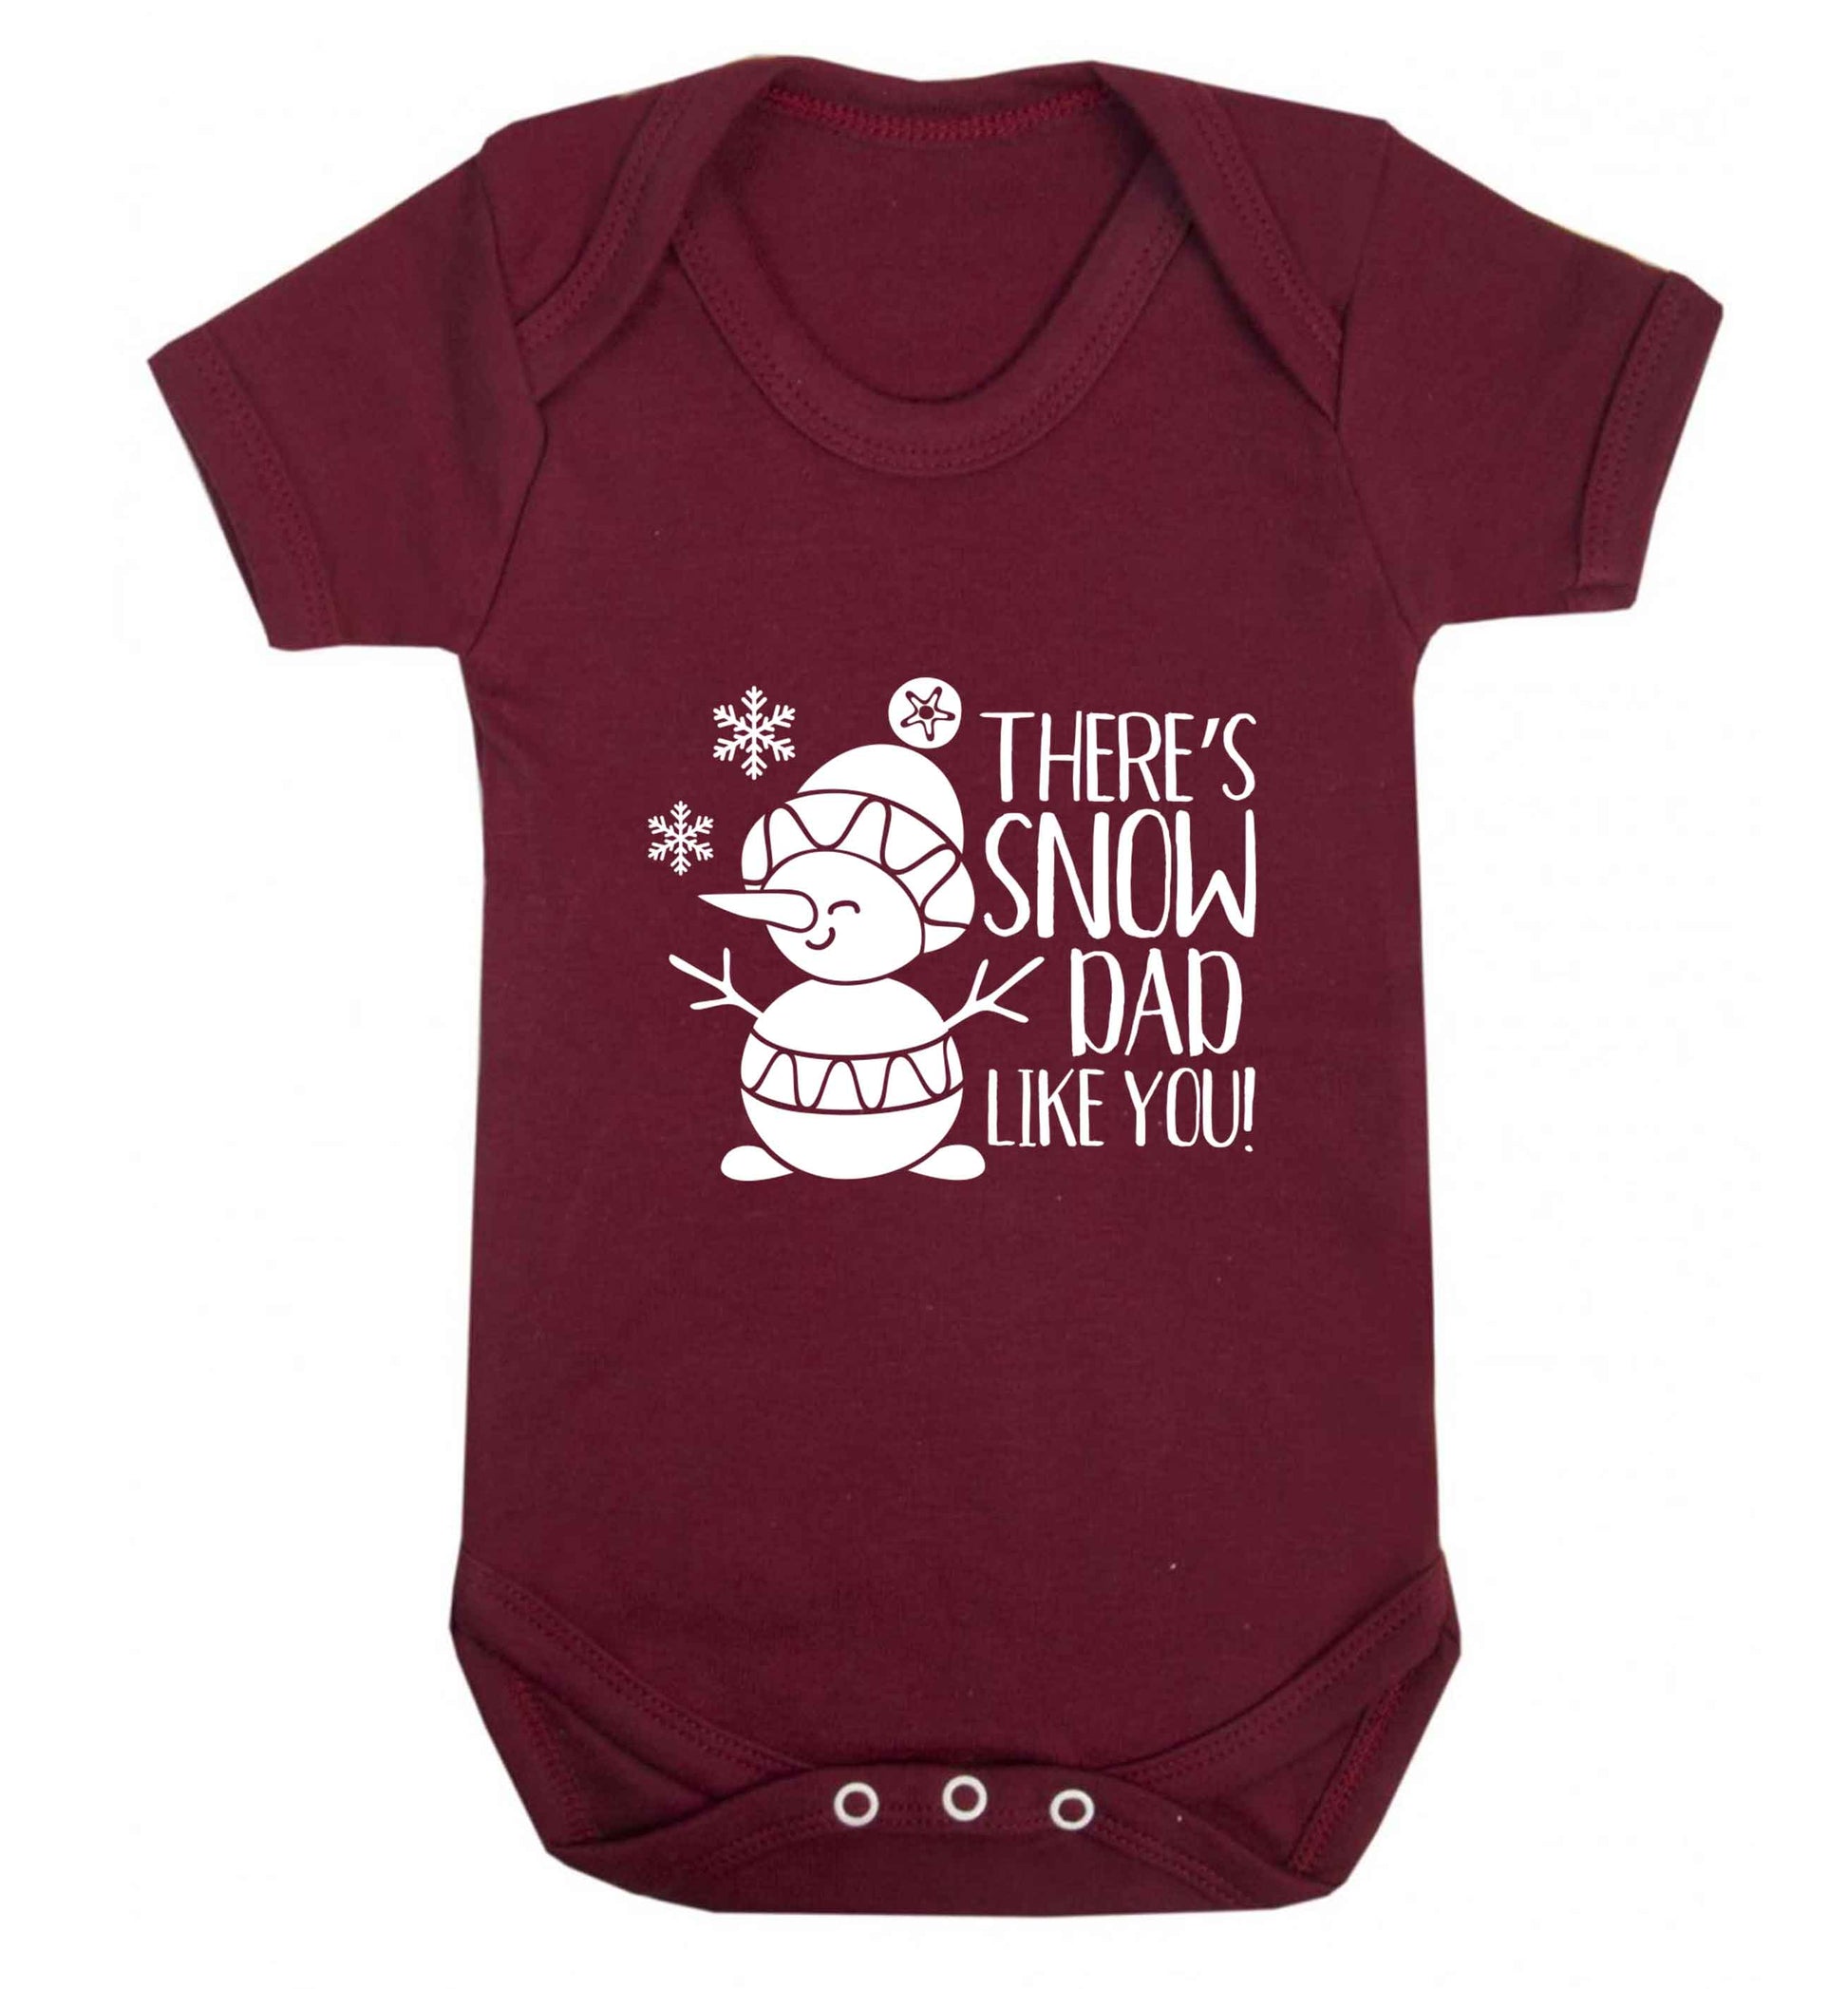 There's snow dad like you baby vest maroon 18-24 months